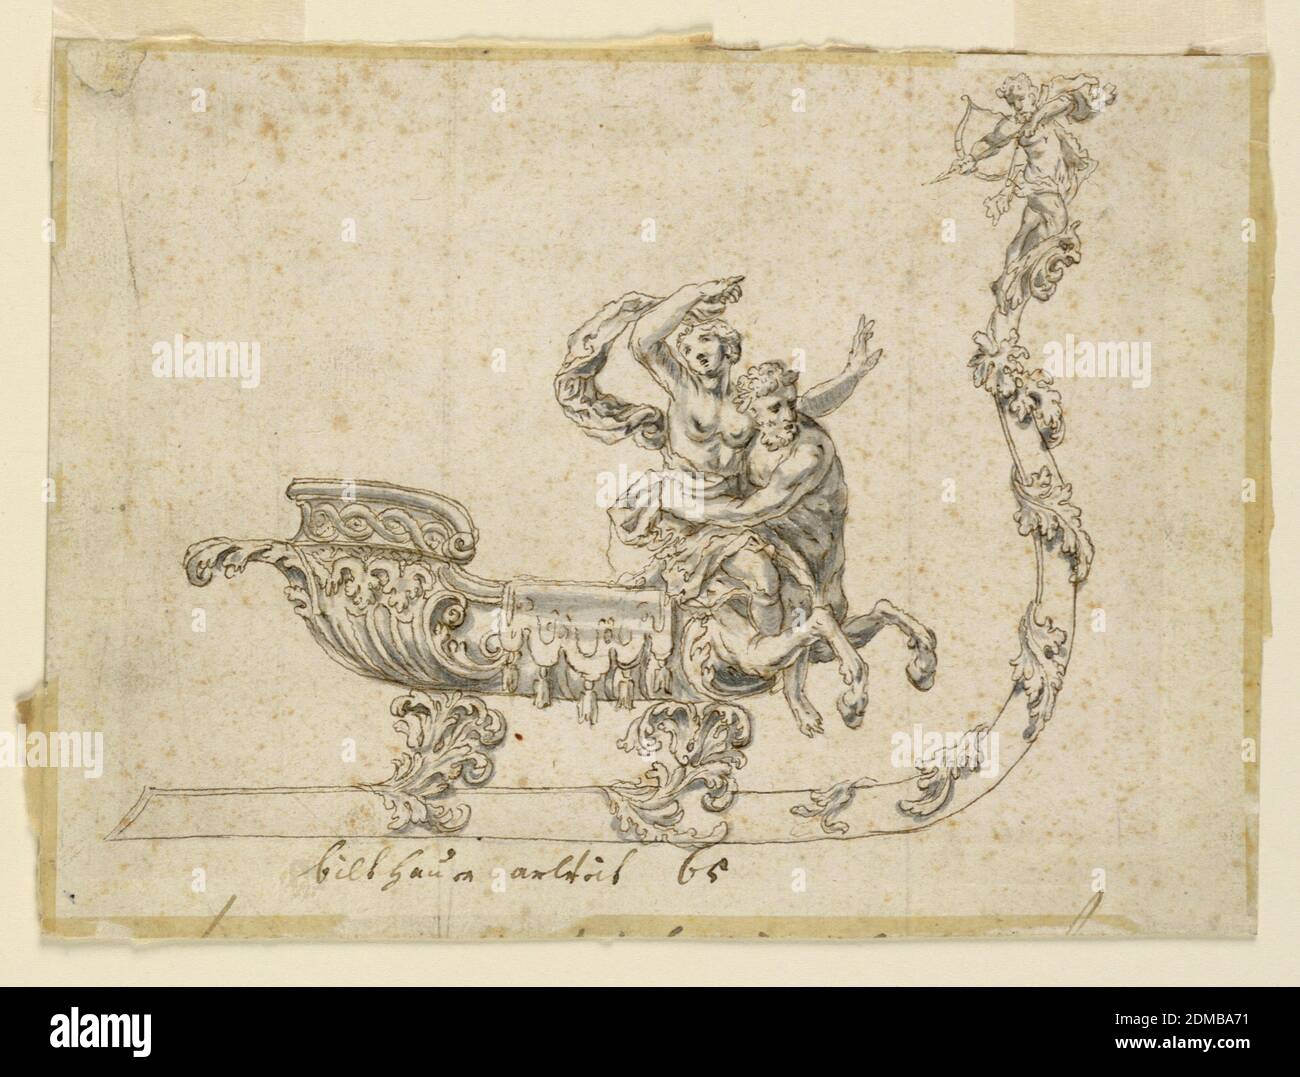 Design for a Salt Cellar in the Shape of a Sleigh, Pen and brown ink, brush and grey wash on paper, The forward part of the body of the vessel represents a centaur abducting a maiden, and behind, the body is in the form of a boat, over whose side hangs a lambrequin. The single runner shown, encircled by leaves, terminates in the figure of a bearded man with bow and arrow aimed at the centaur., Germany, 1675-1690, Drawing Stock Photo